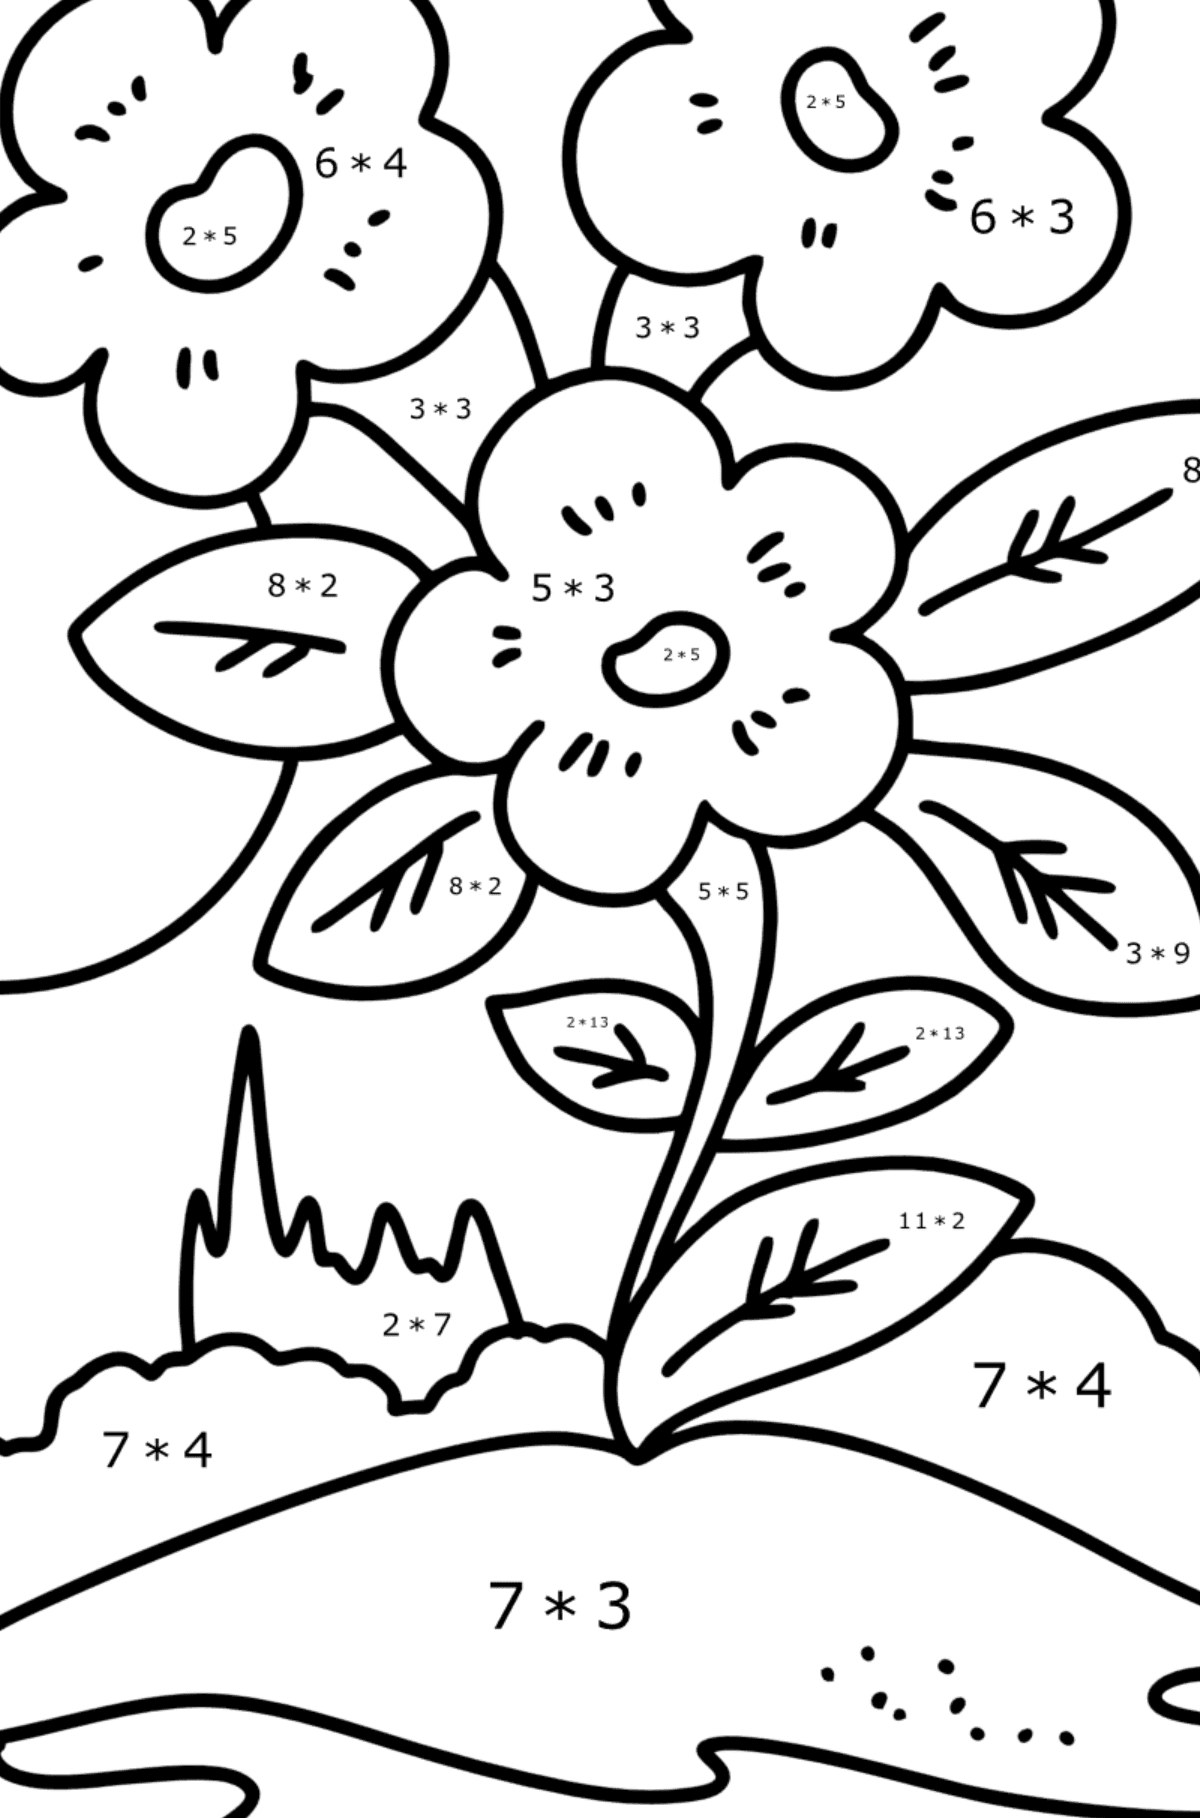 Spring flowers coloring page for Kids - Math Coloring - Multiplication for Kids